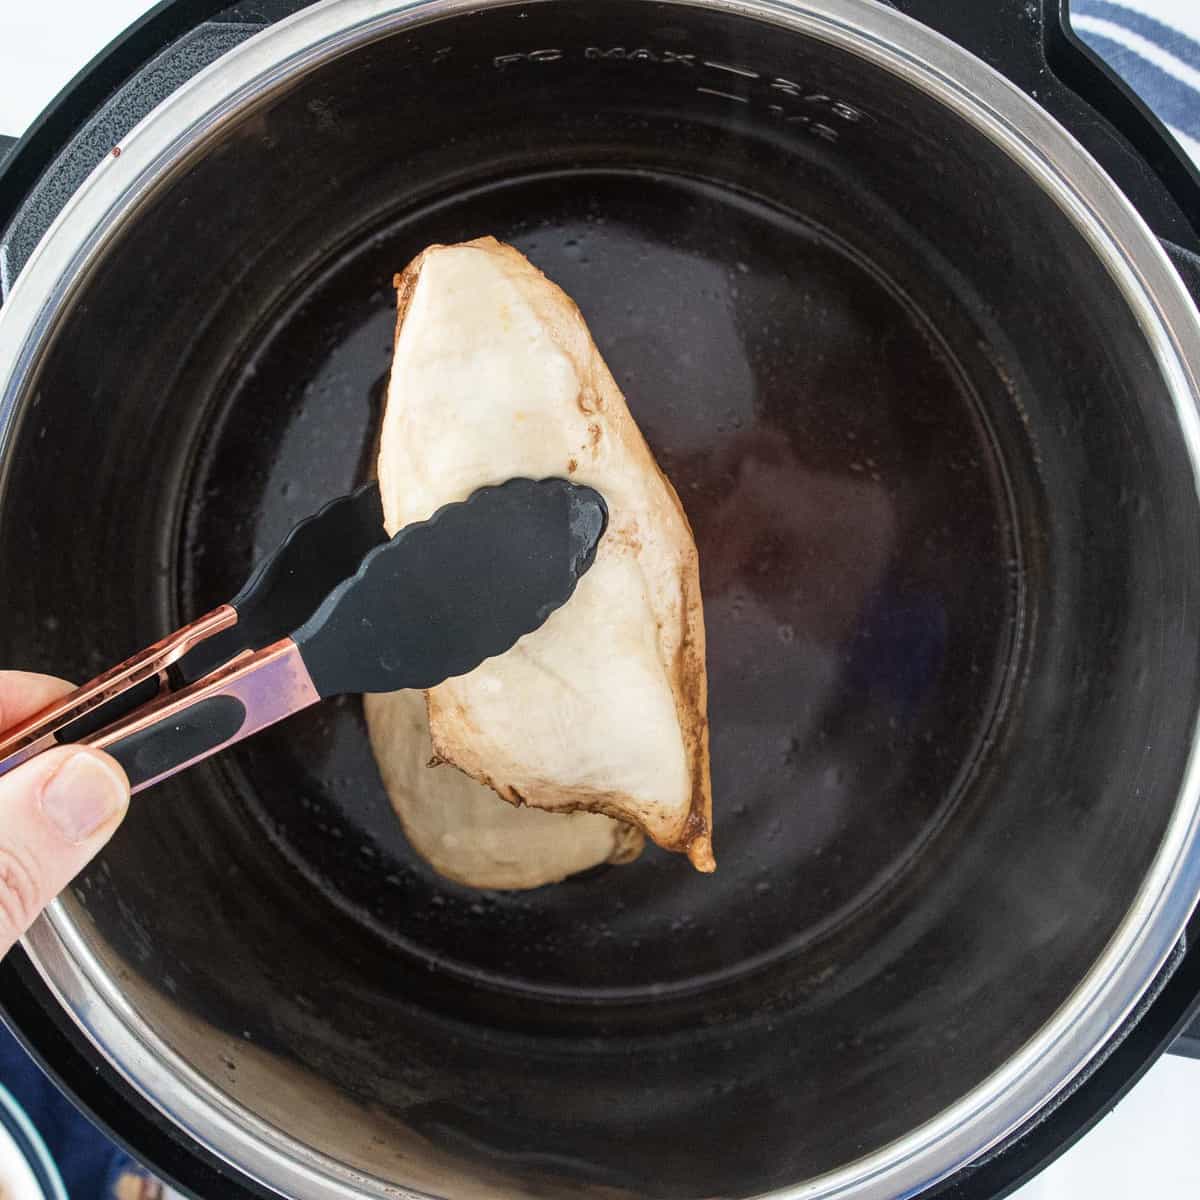 A pair of tongs placing a chicken breast in an instant pot.